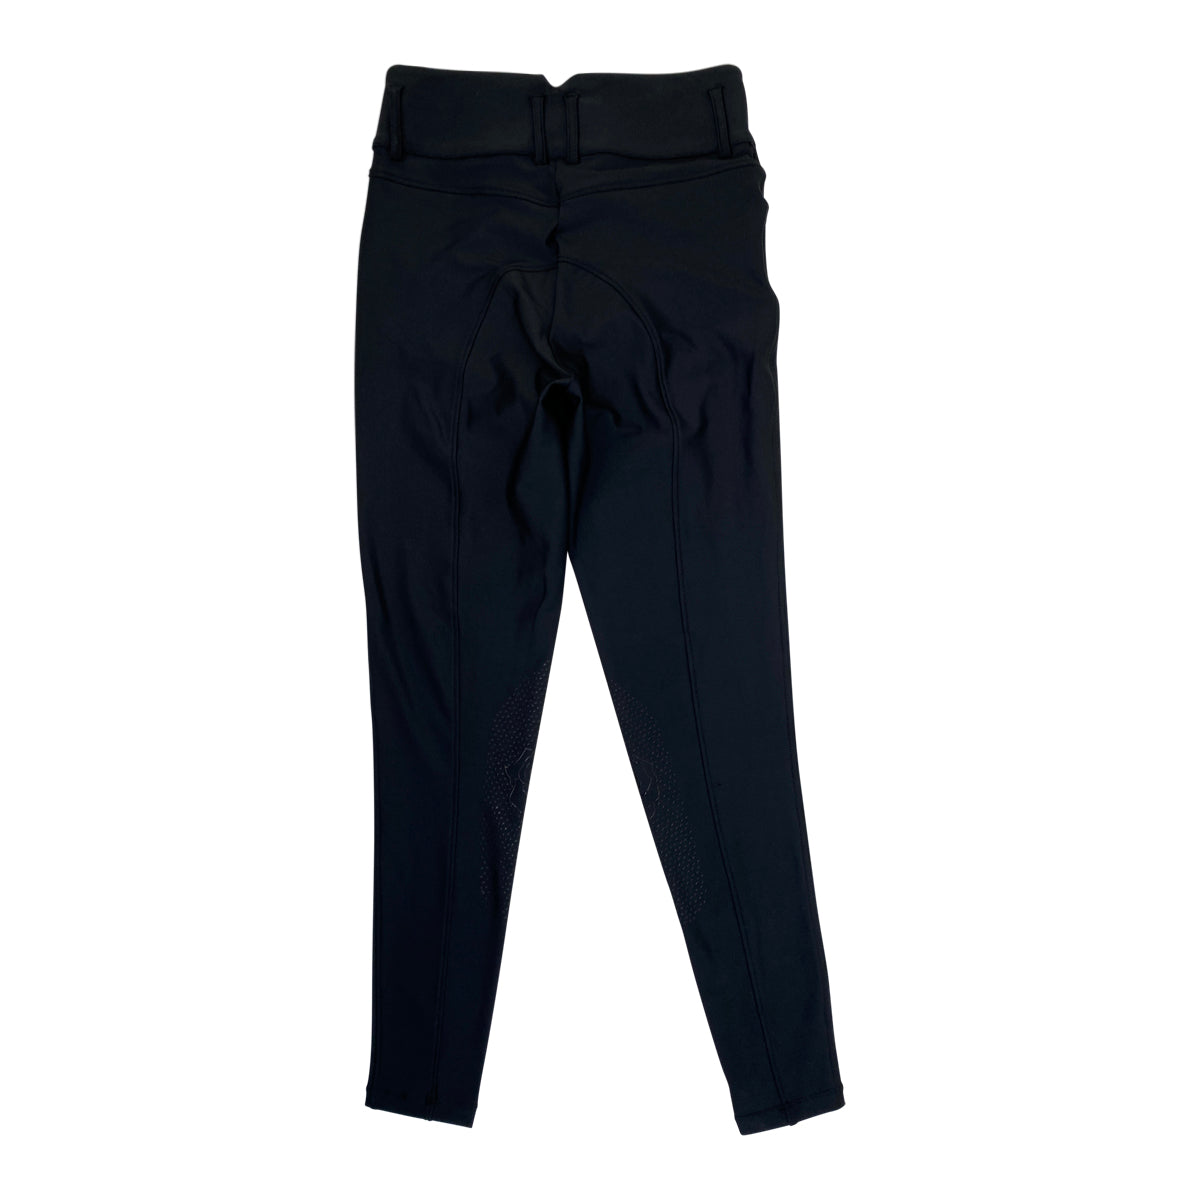 Hannah Childs 'Lifestyle Ramy' High Rise Knee Patch Breeches in Pitch Black